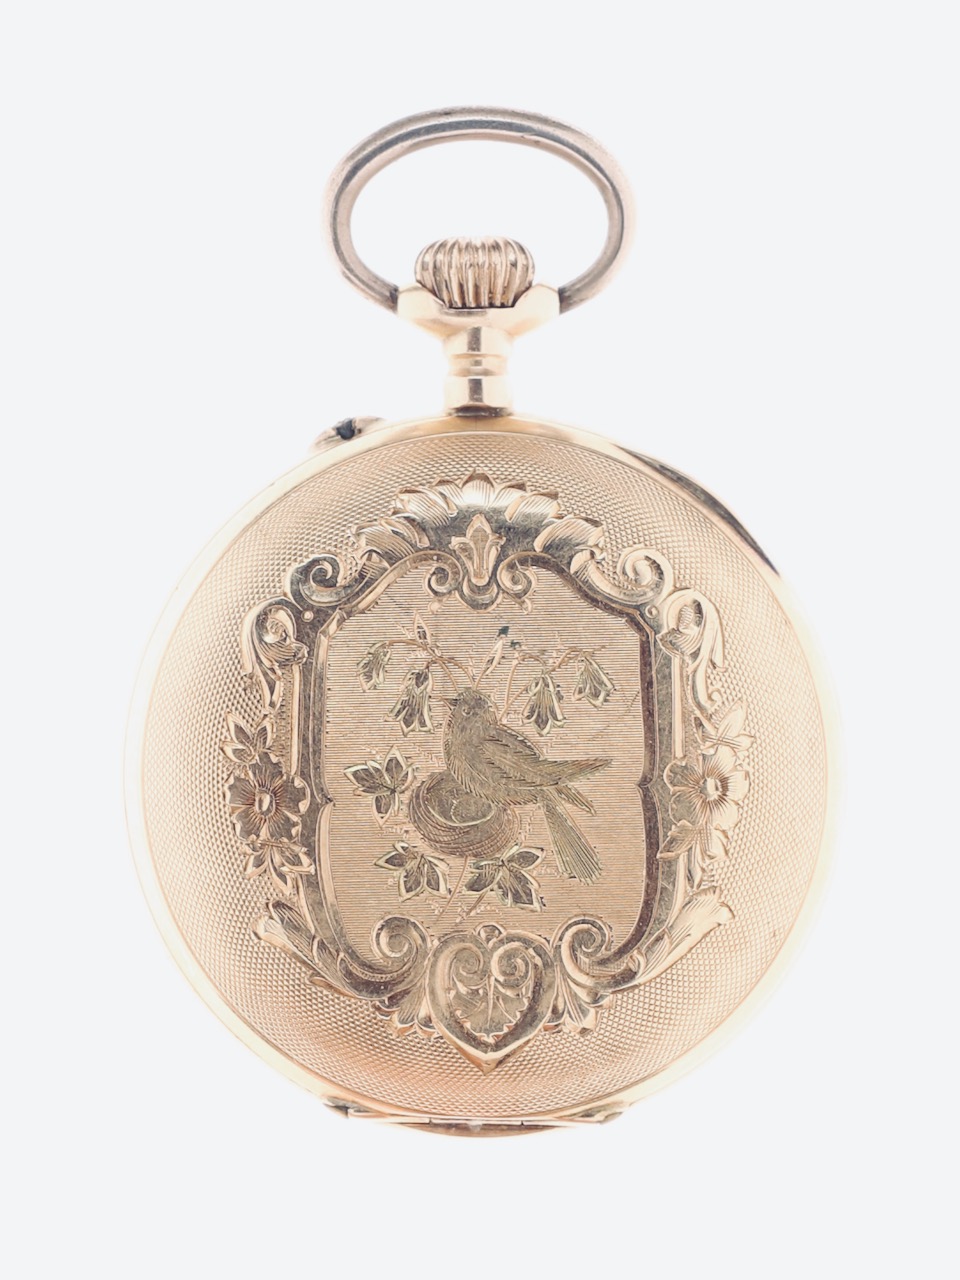 Swiss Ladies Fob 14 k Red Gold 1890s